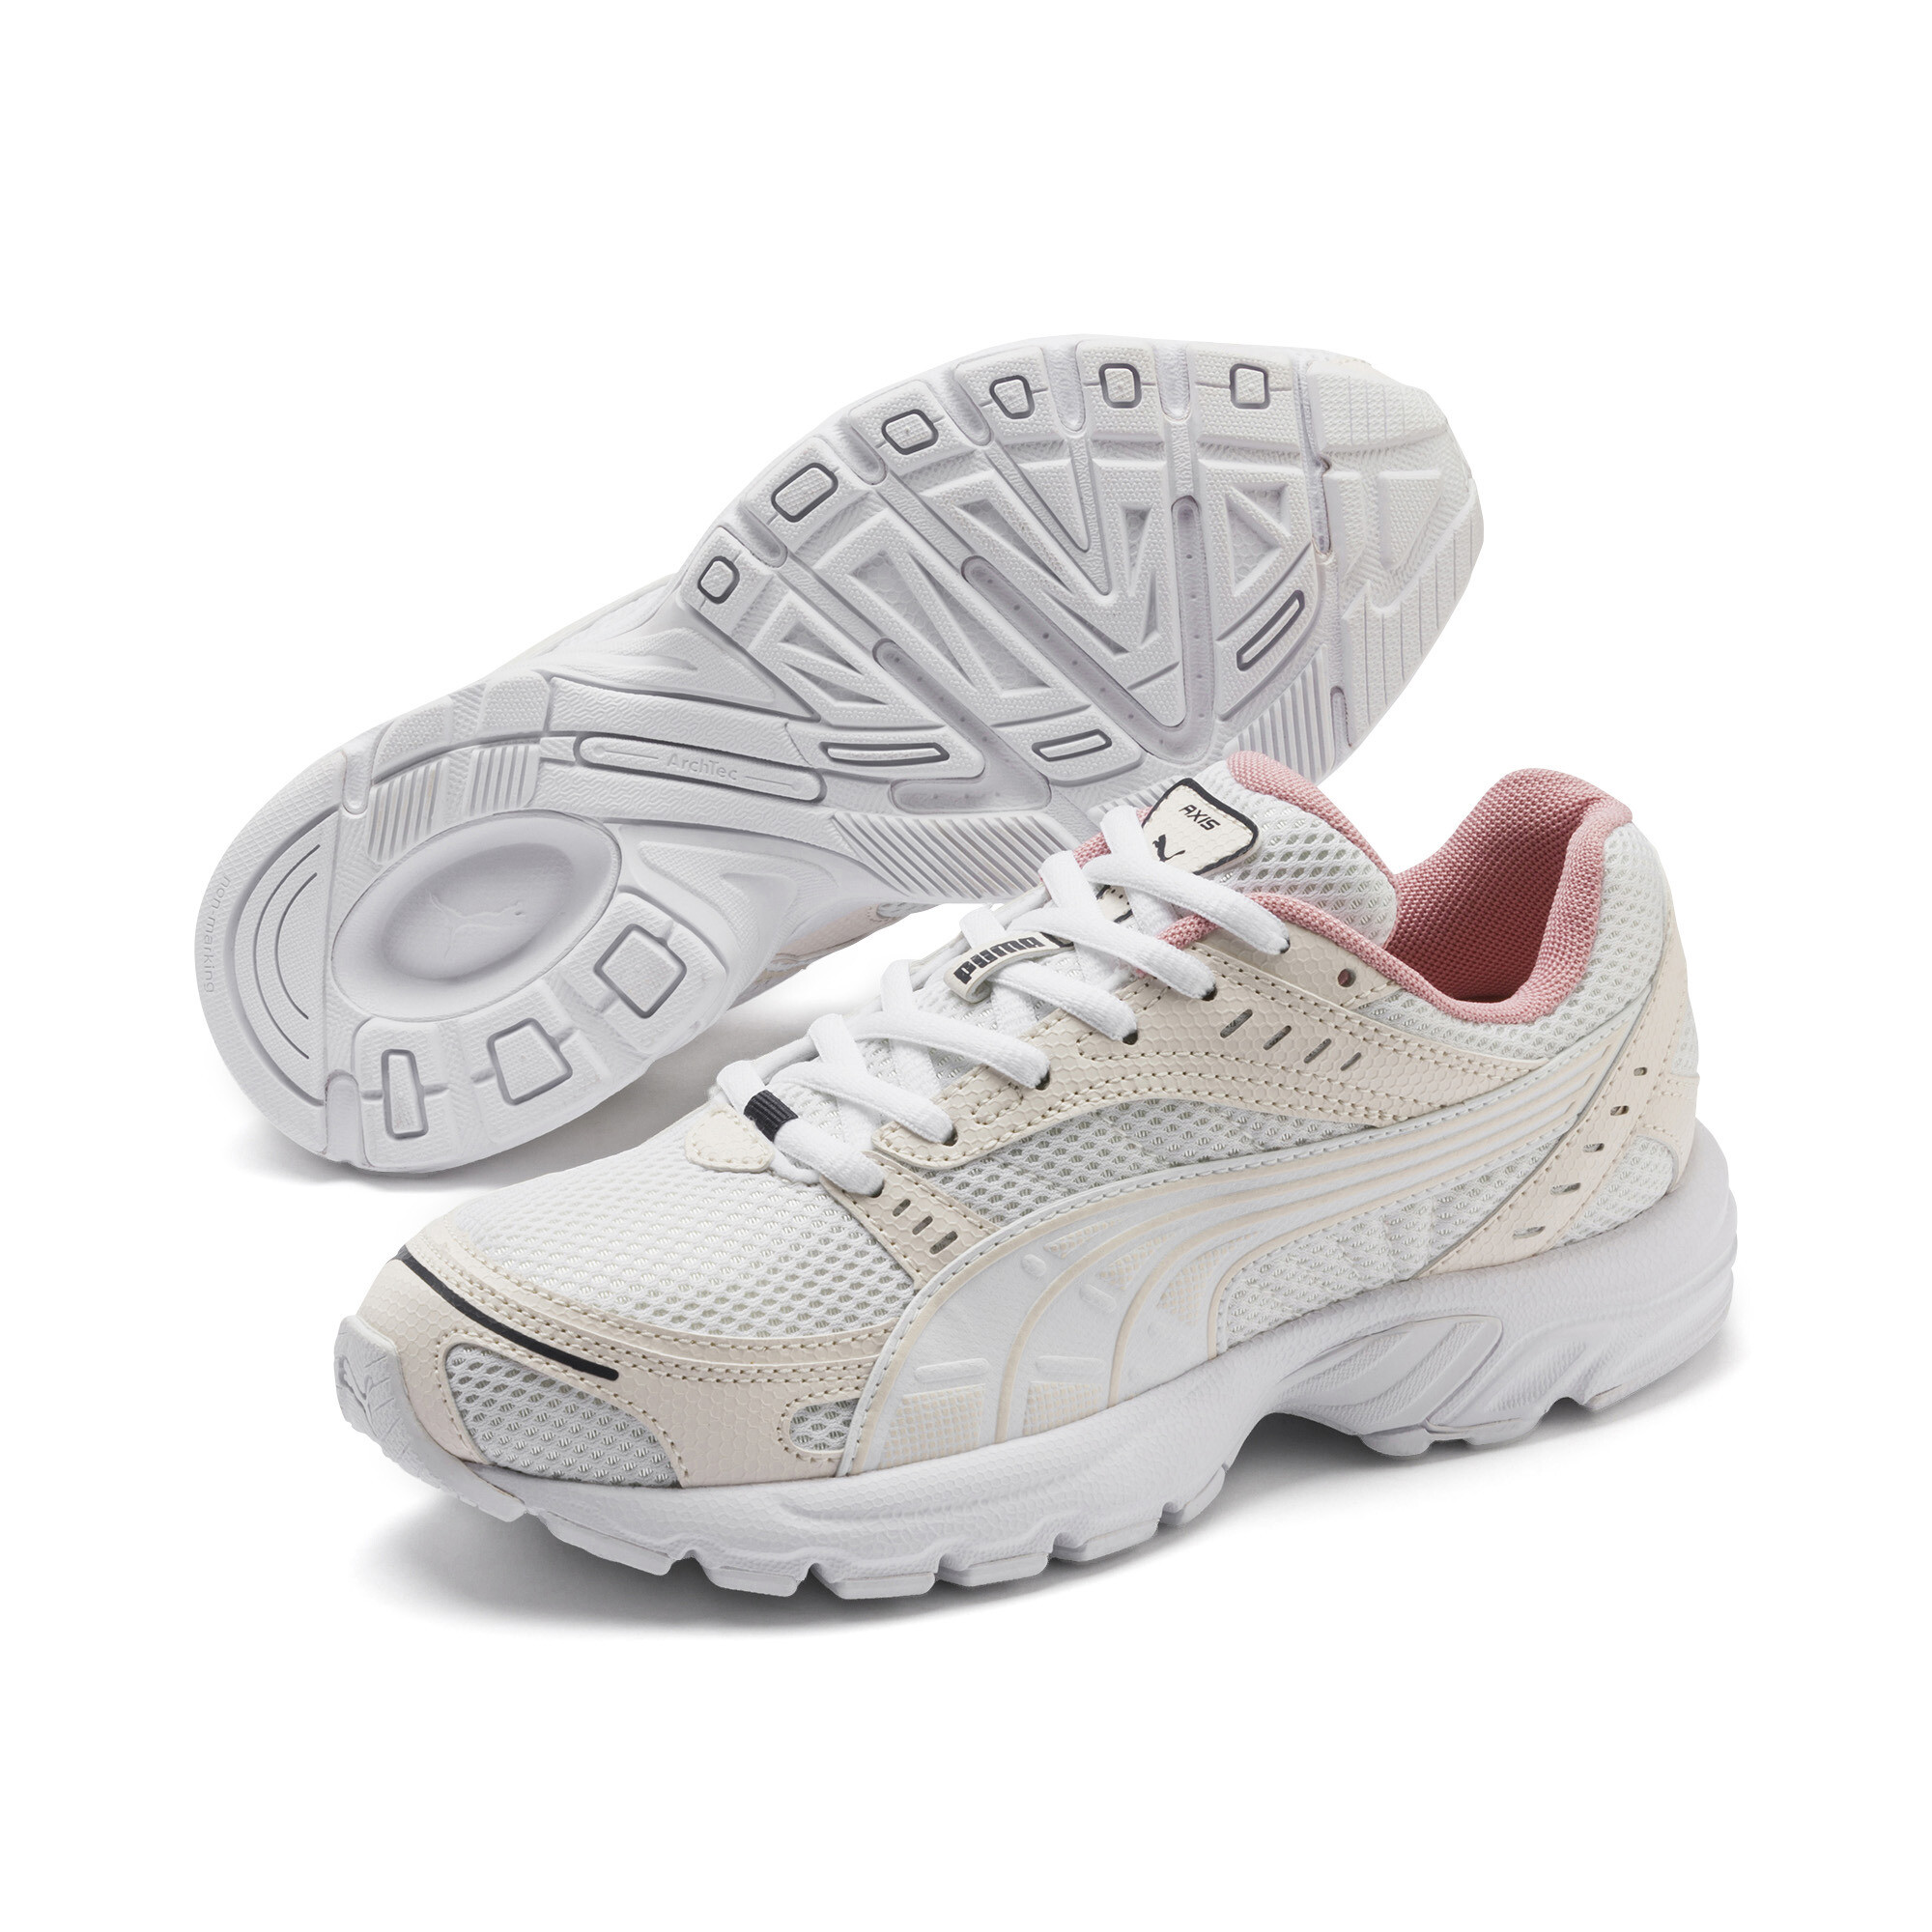 Puma Axis Trainers, White, Size 40, Shoes